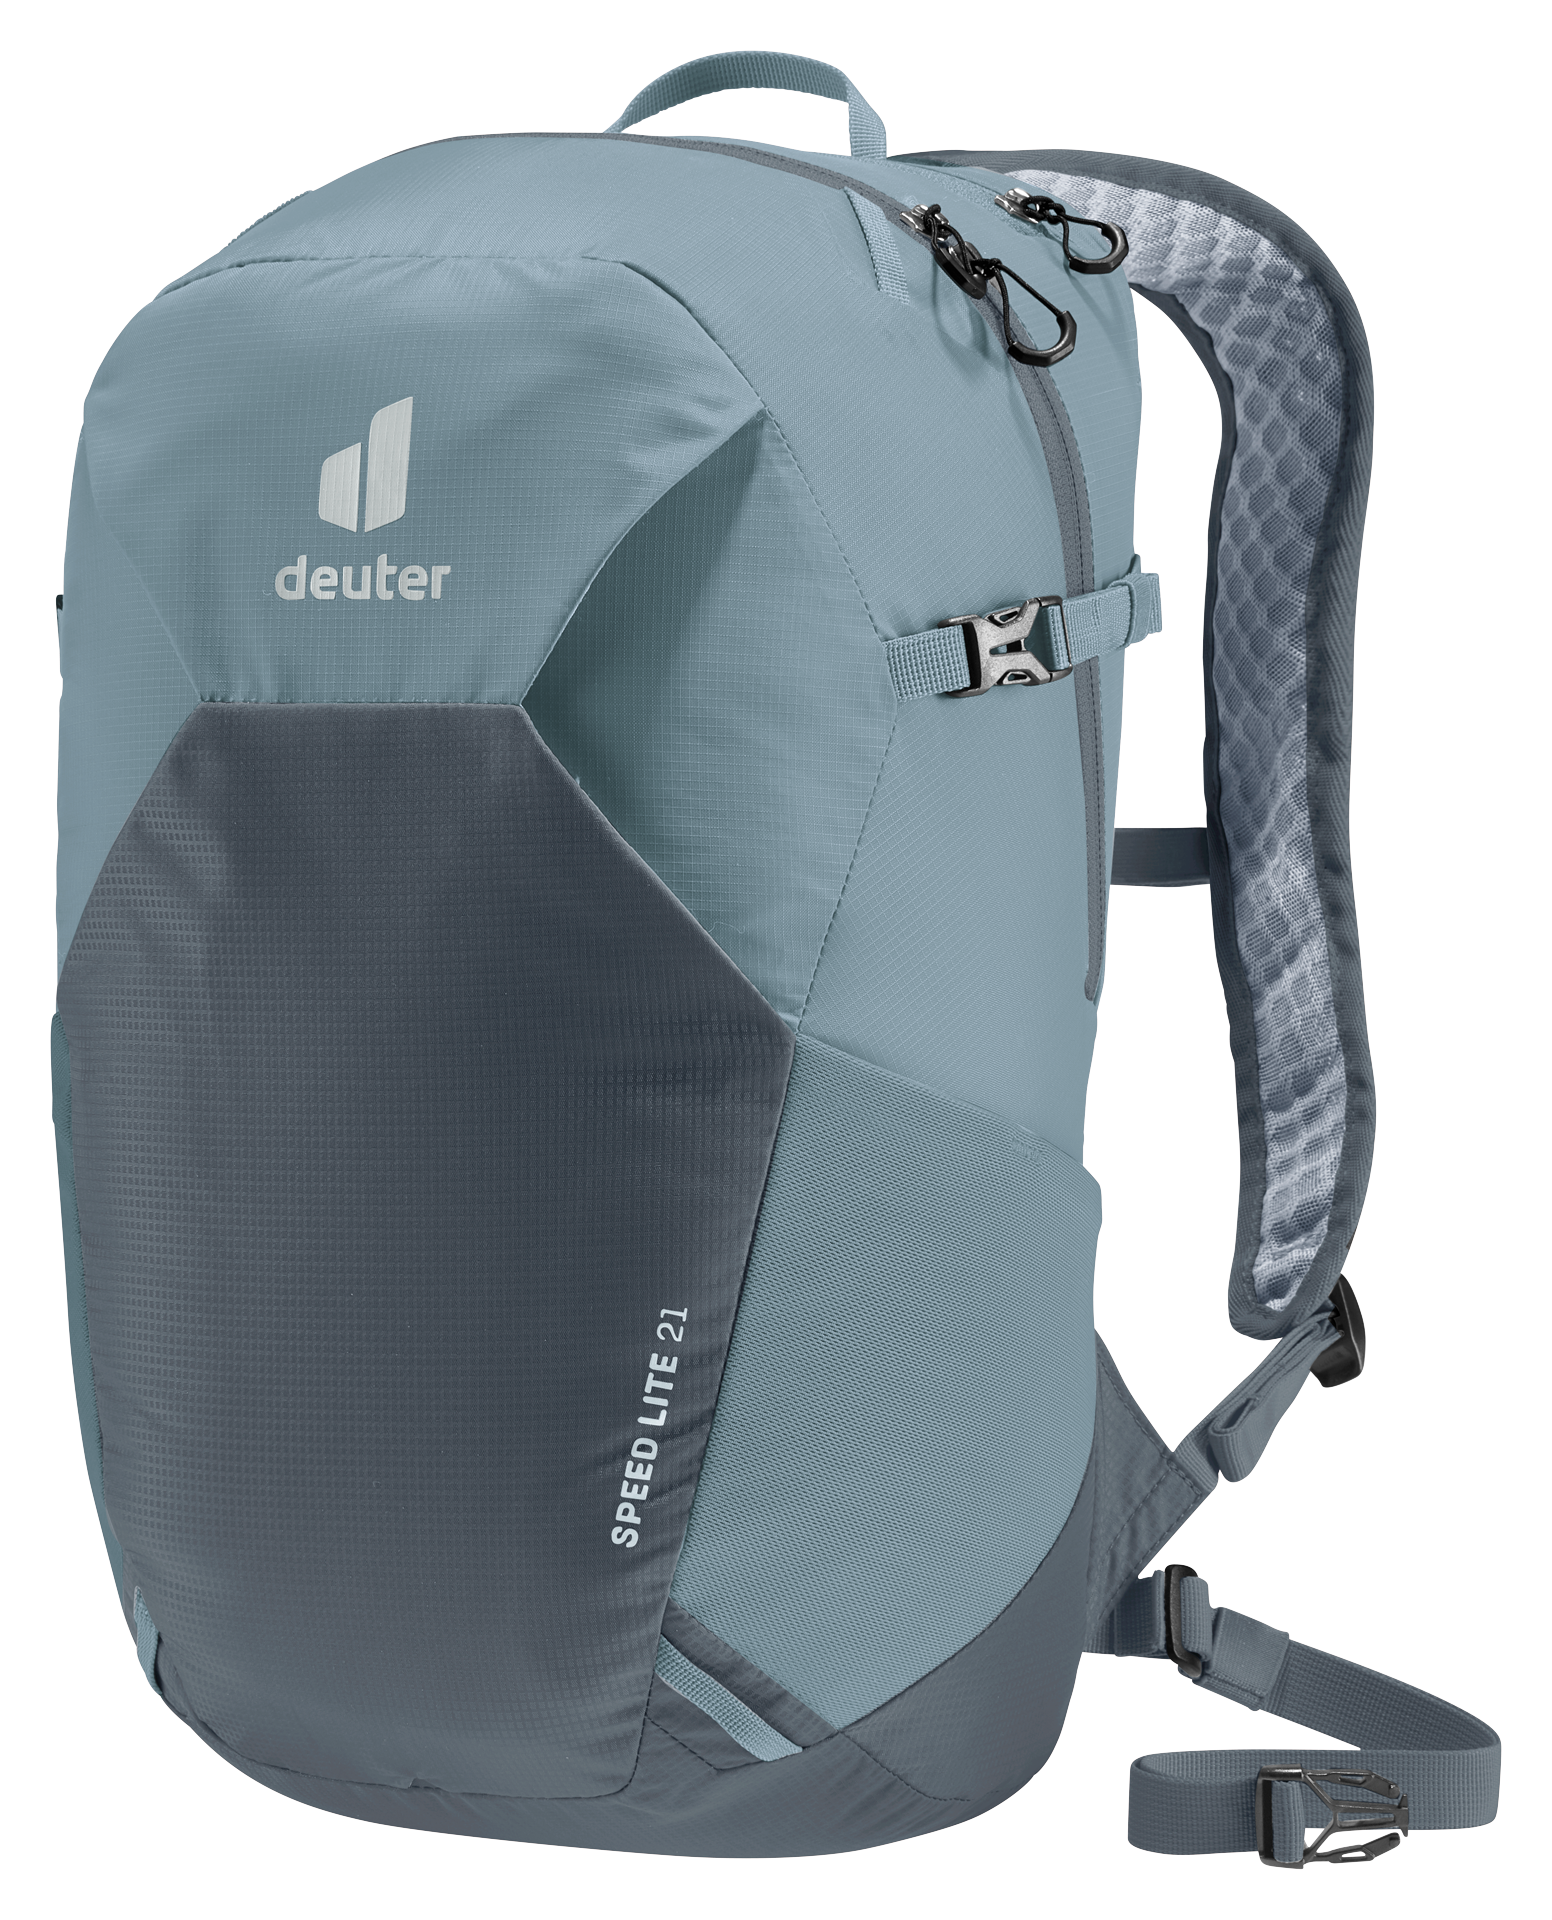 Unlock Wilderness' choice in the Deuter Vs North Face comparison, the Speed Lite 21 by Deuter